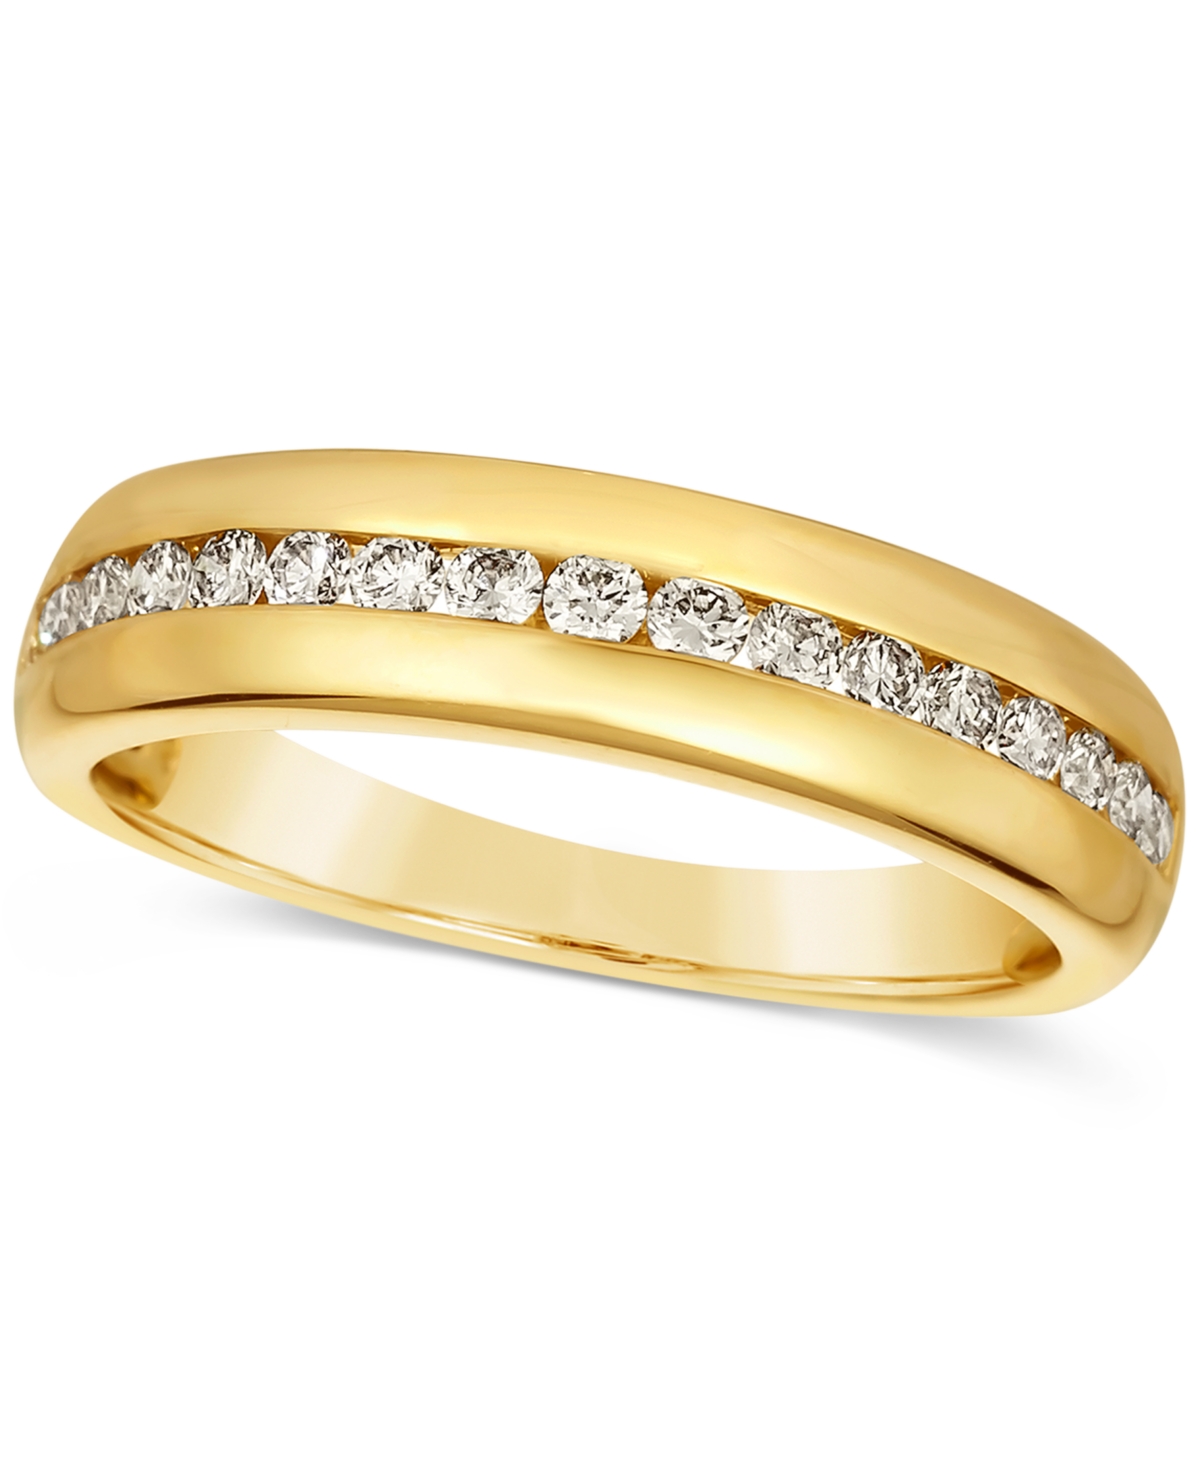 Men's Nude Diamond Band (1/2 ct. t.w.) in 14k Gold - Gold